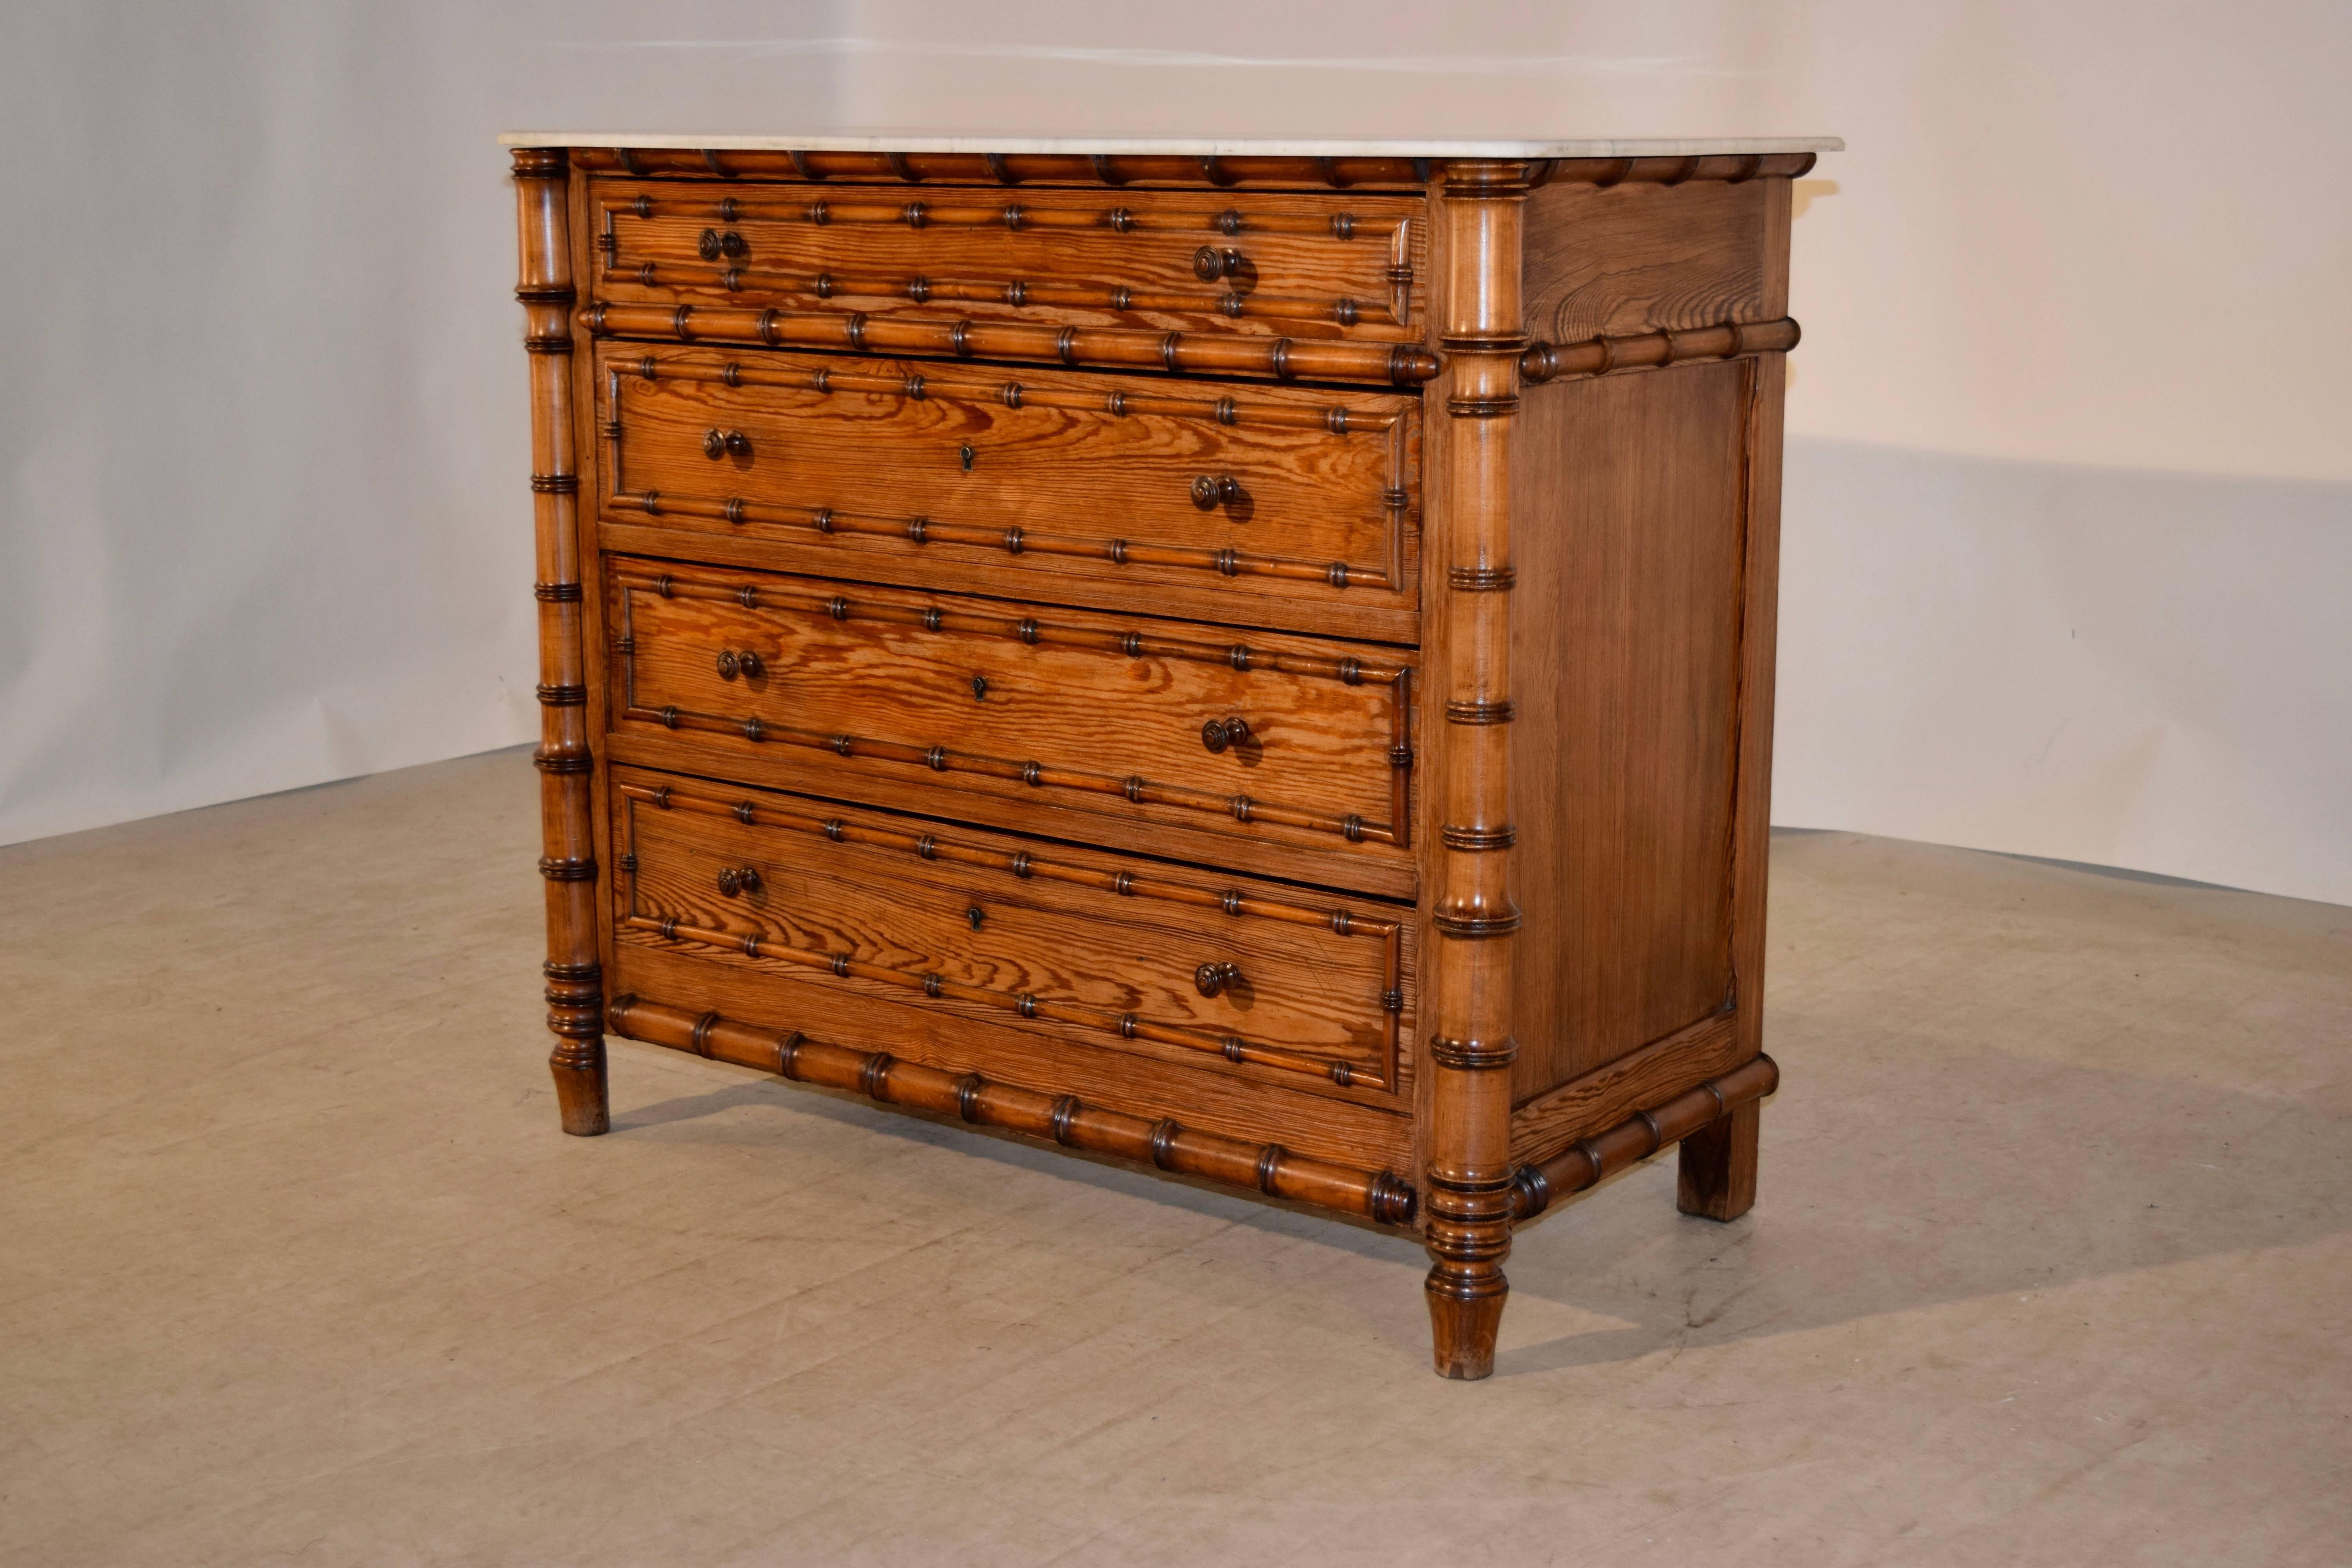 19th century French chest of drawers with a marble top which follows down to four drawers, all banded with faux bamboo turned moldings, flanked by faux bamboo turned columns. The sides are paneled as well. Gorgeously grained pitch pine.